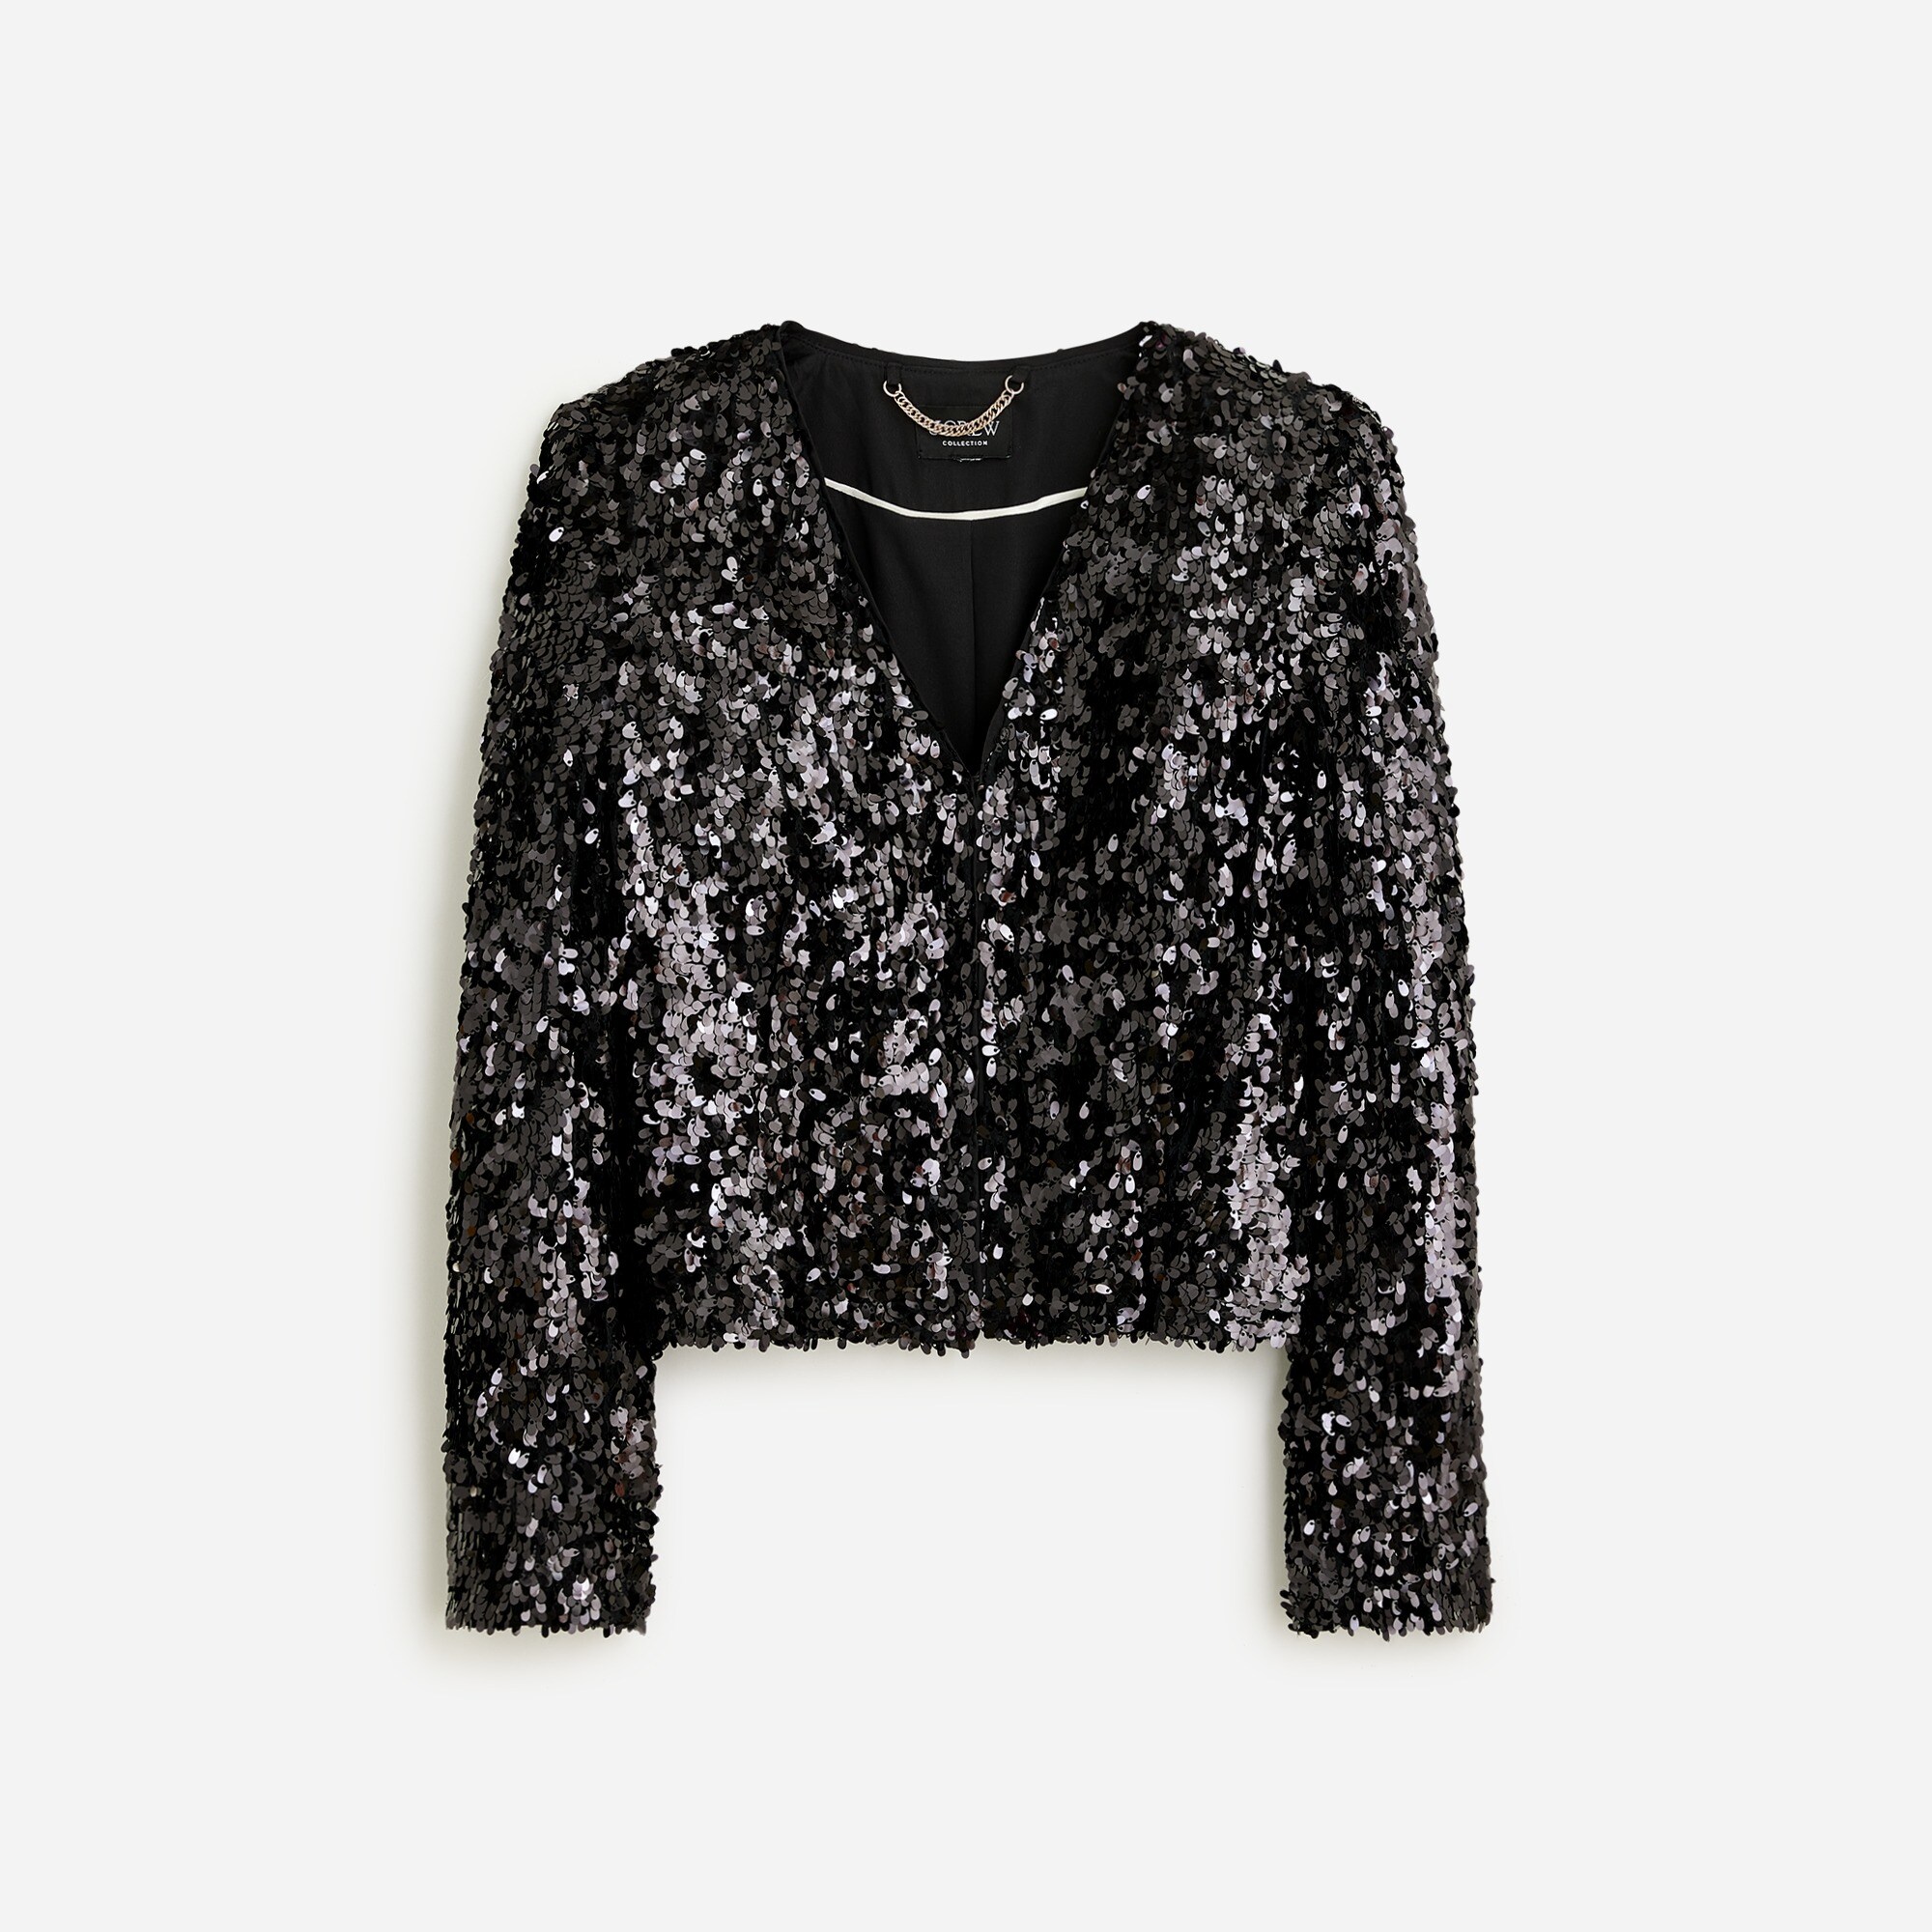  Collection sequin lady jacket